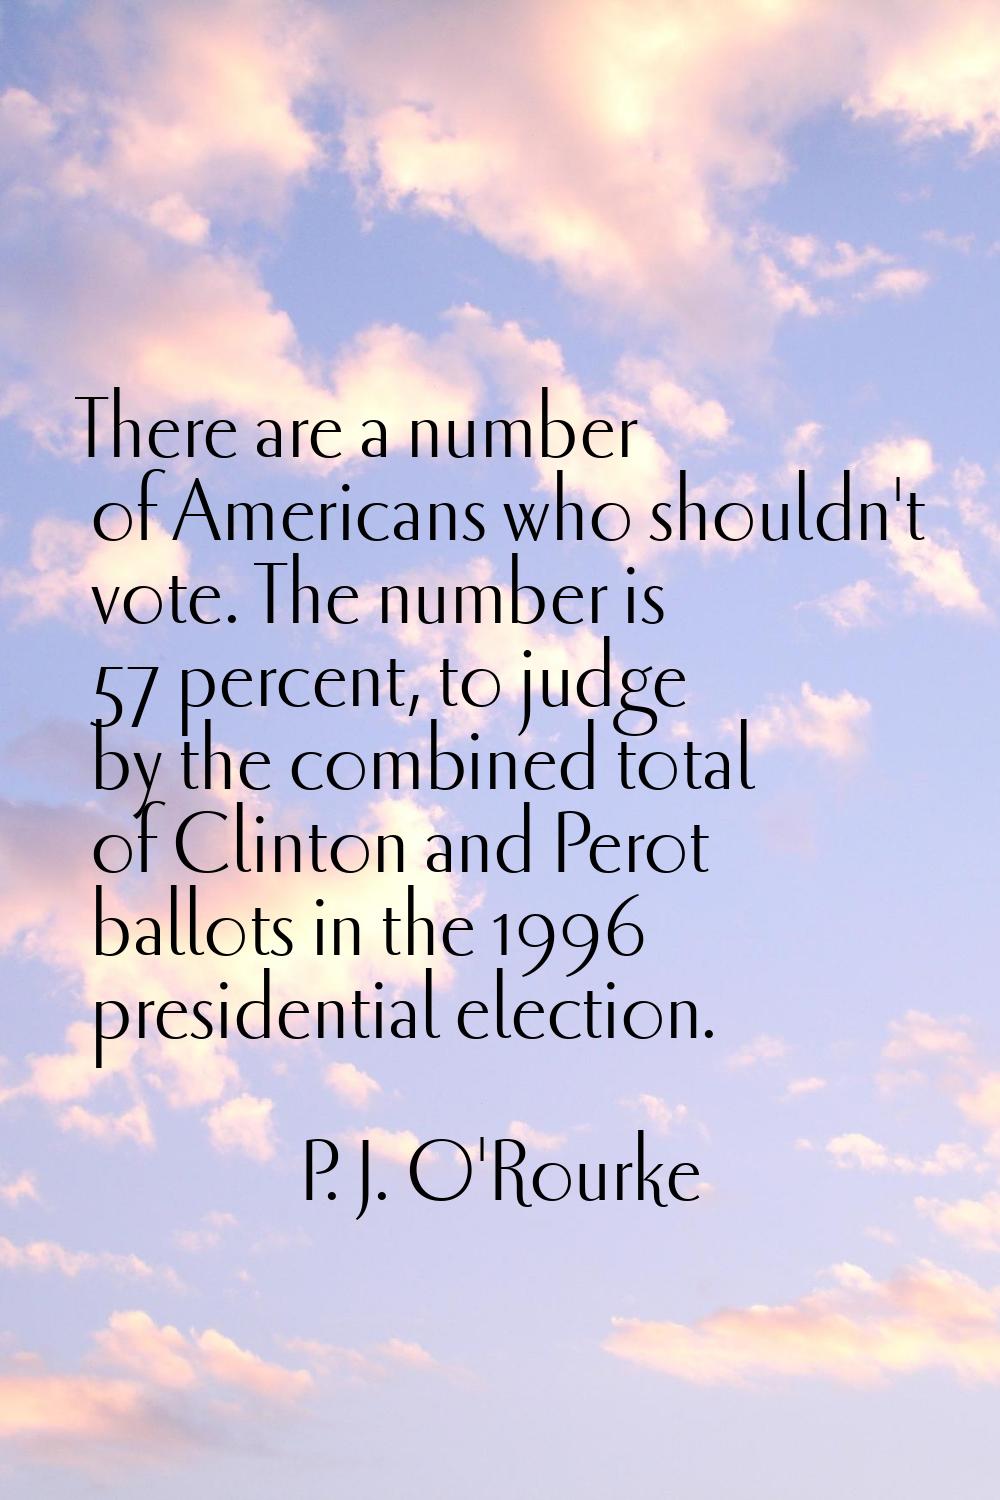 There are a number of Americans who shouldn't vote. The number is 57 percent, to judge by the combi